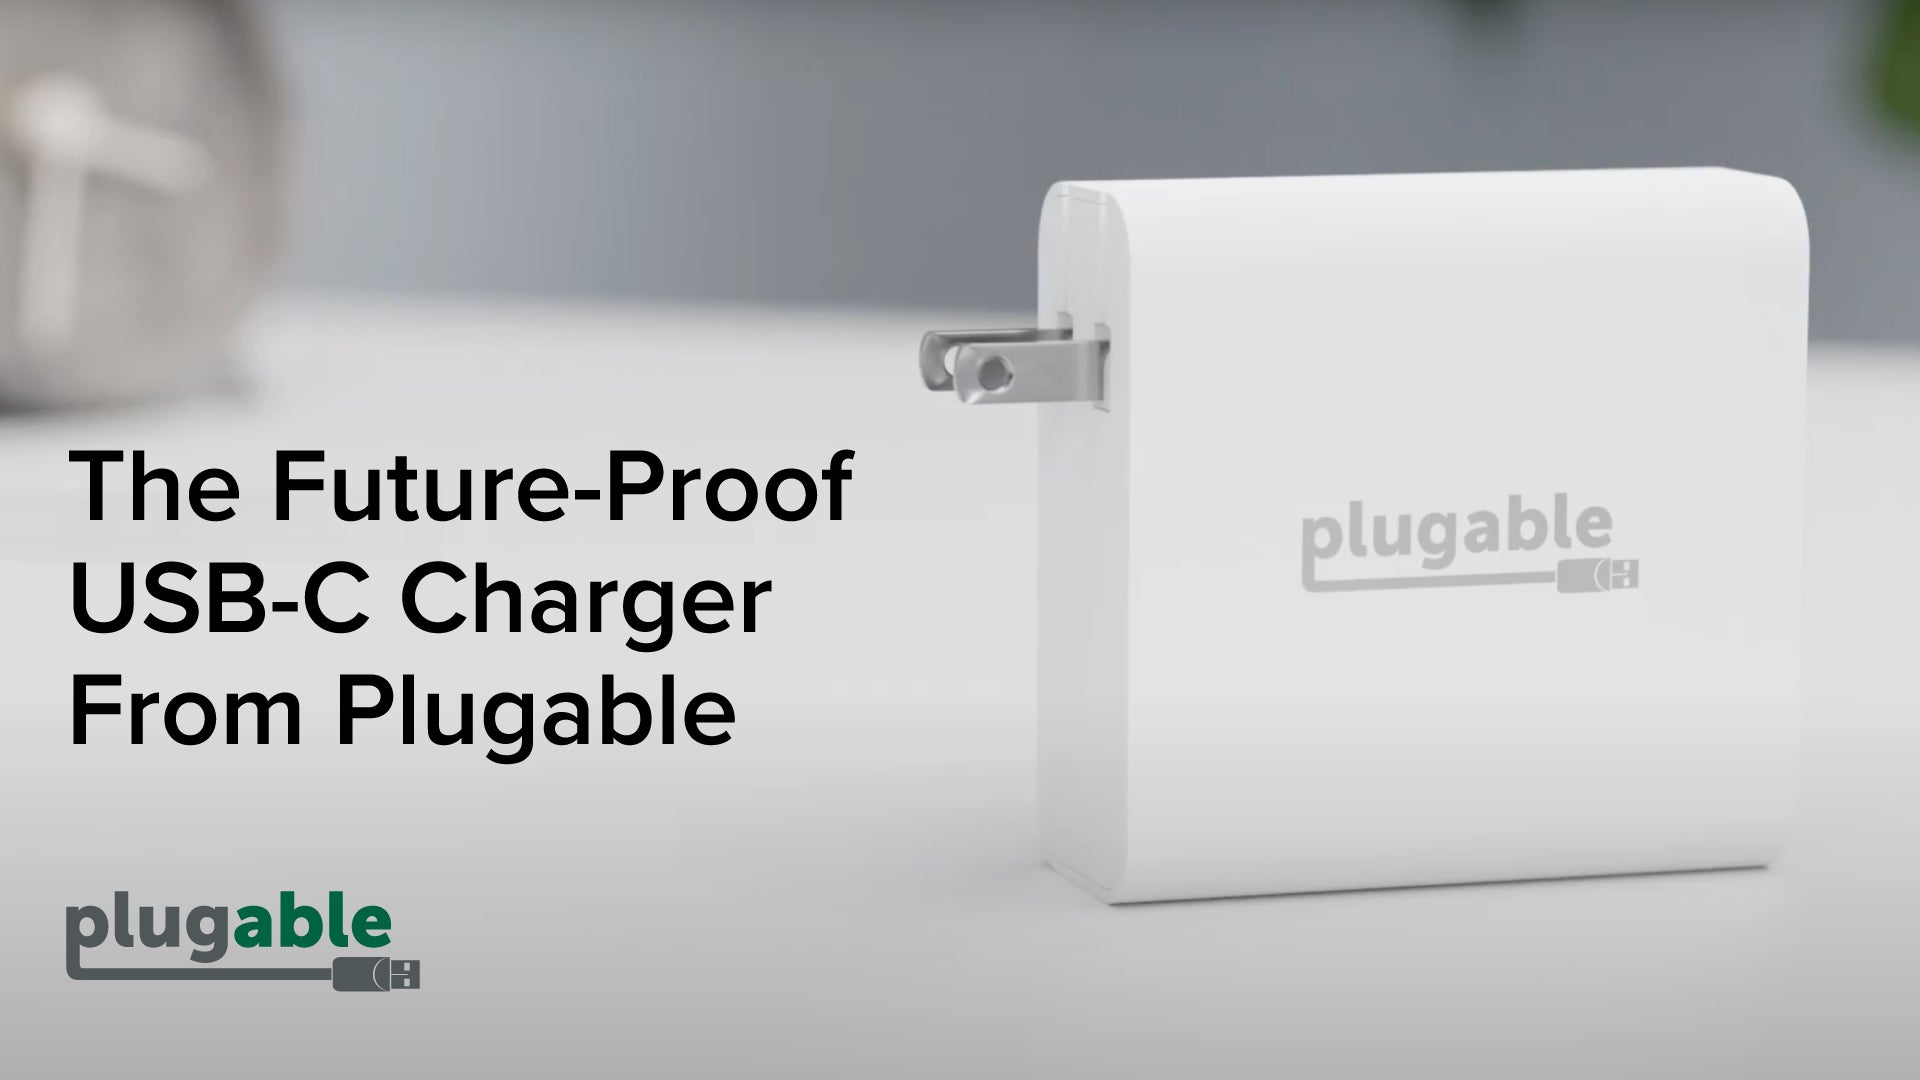 Thumbnail image showing PS-EPR-140C1 with text stating The Future-Proof USB-C Charger From Plugable